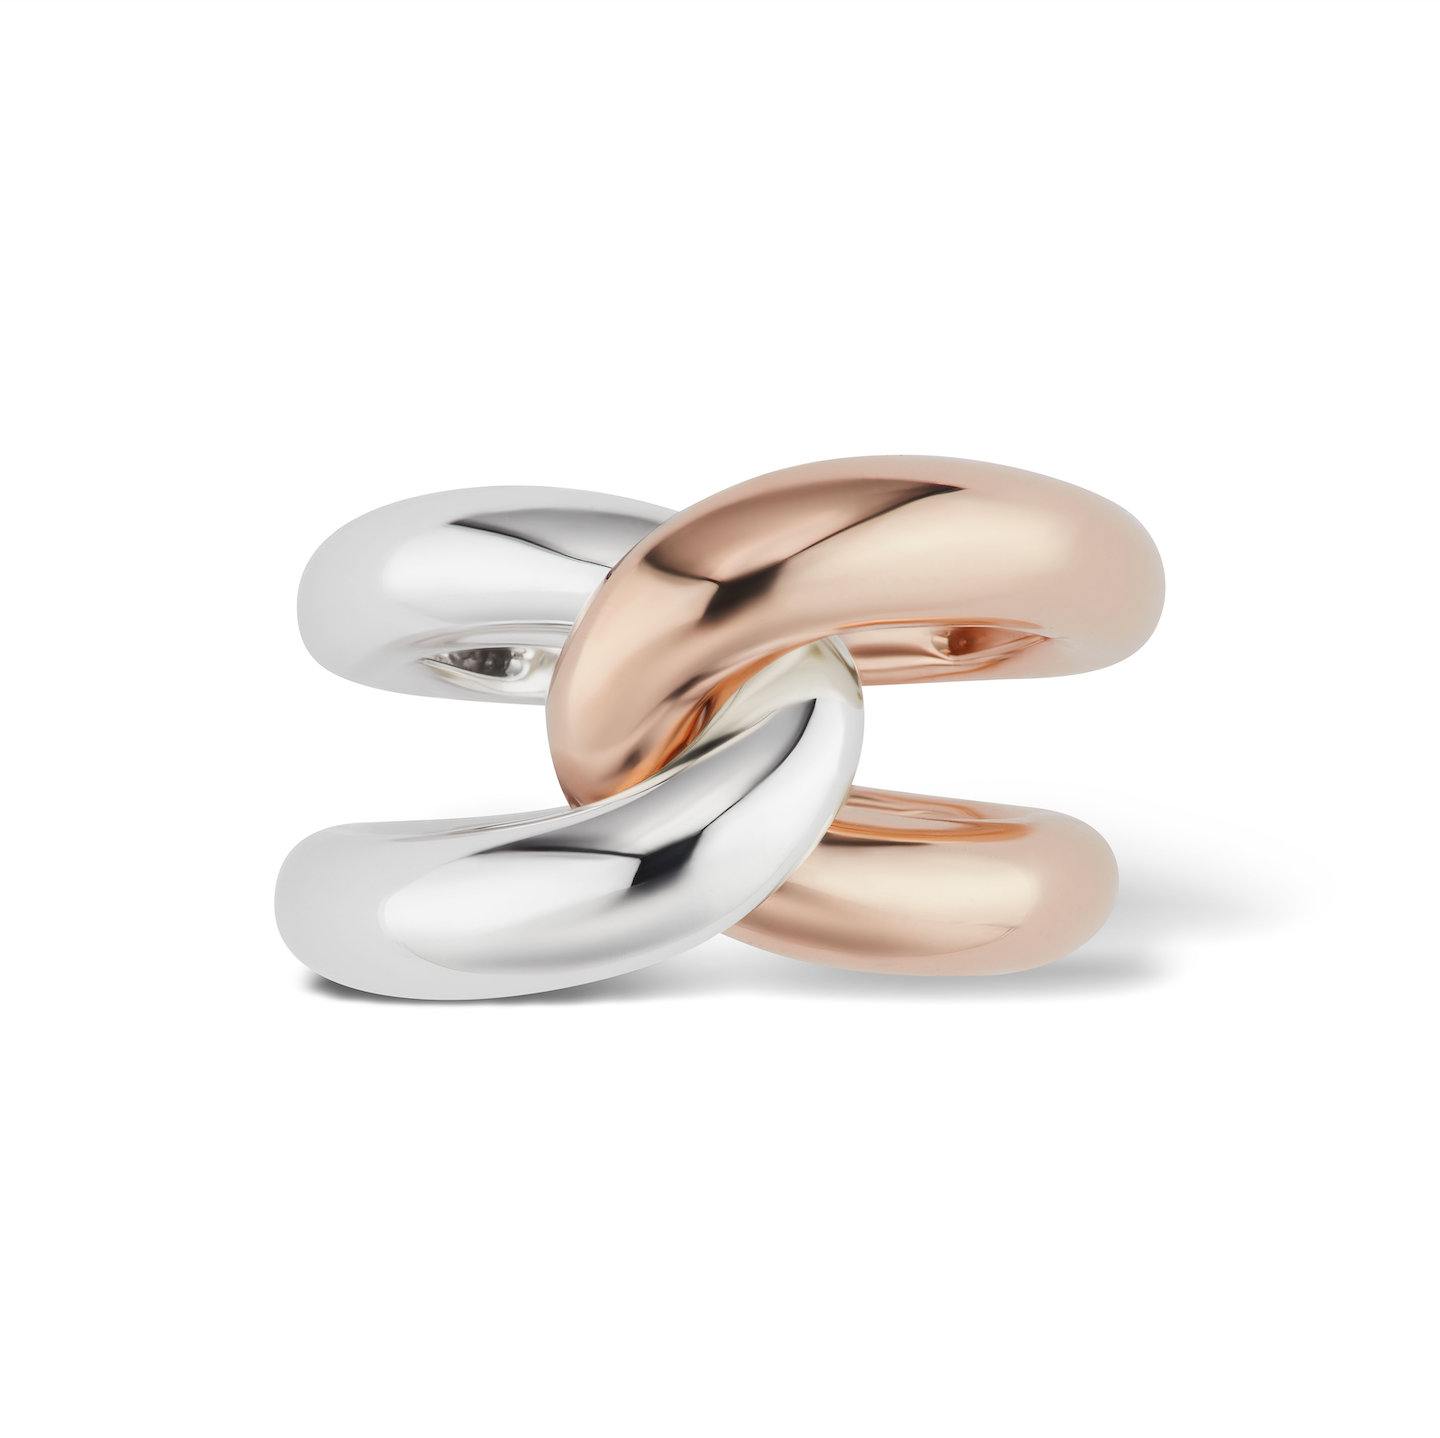 Gold Intertwin Ring